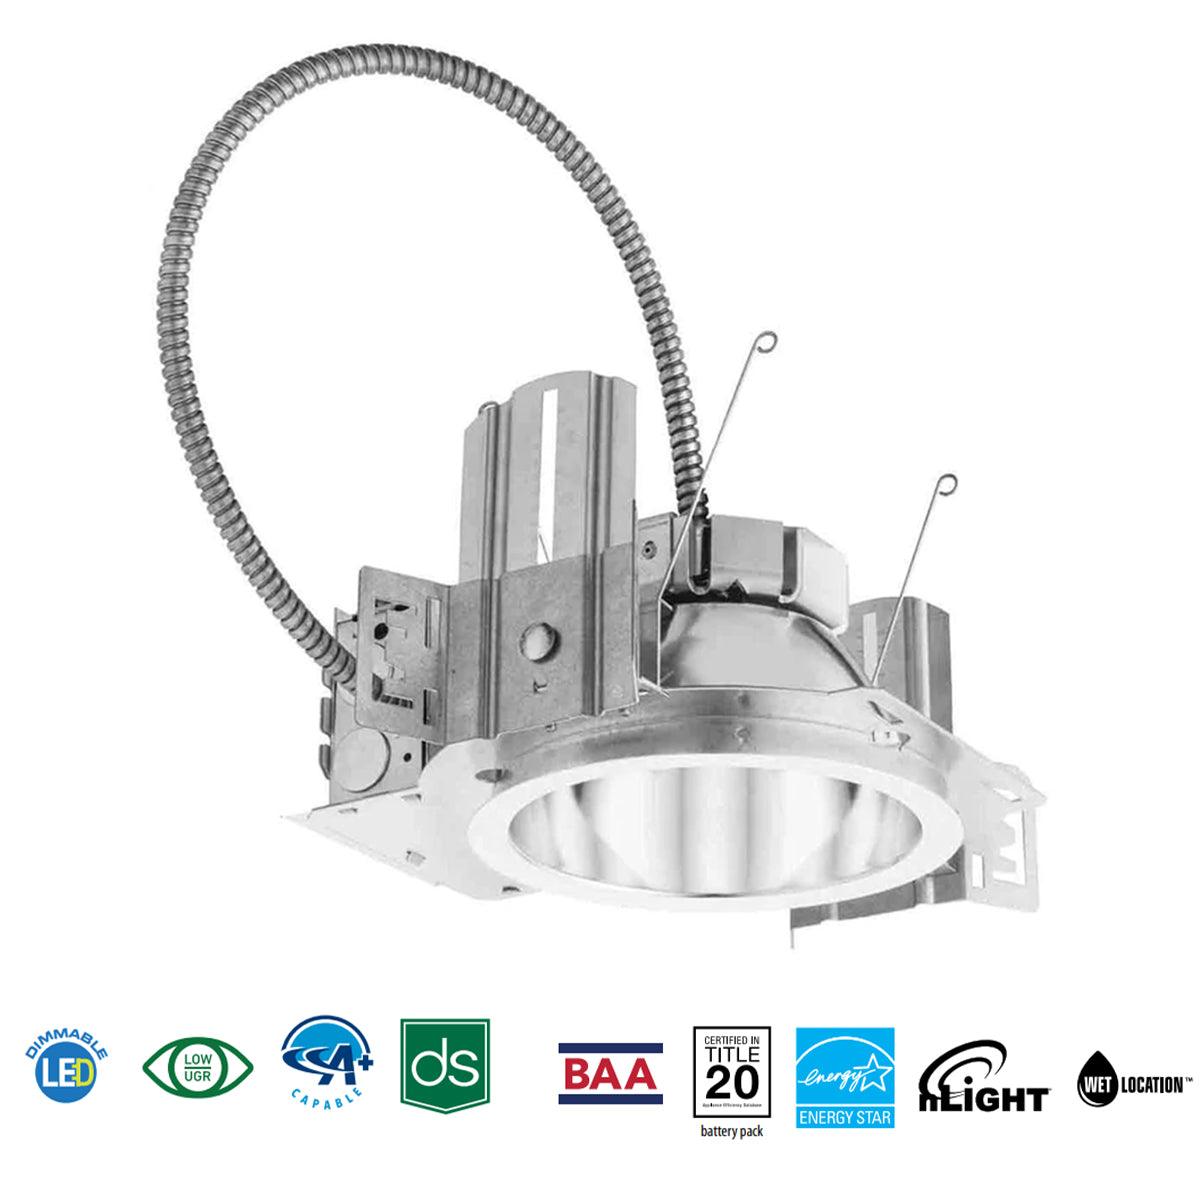 Lithonia LDN6 Commercial LED Recessed Downlight, 1000 lumens, 3500K (Reflector Sold Separately)